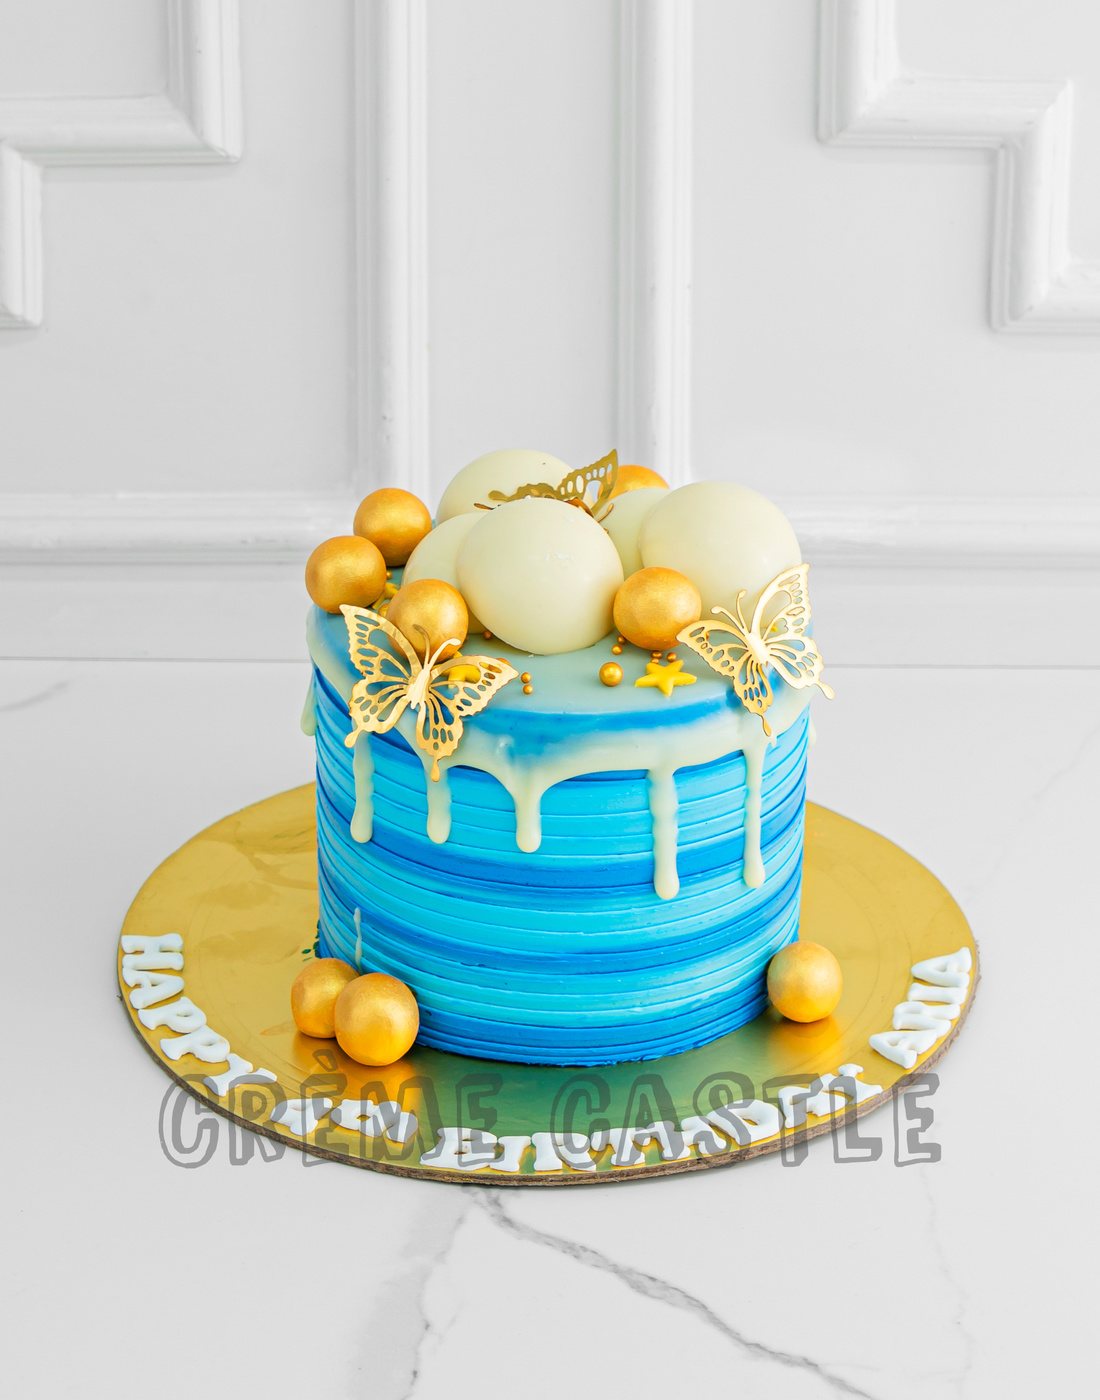 White & Gold Cake | Cake Delivery in Lagos